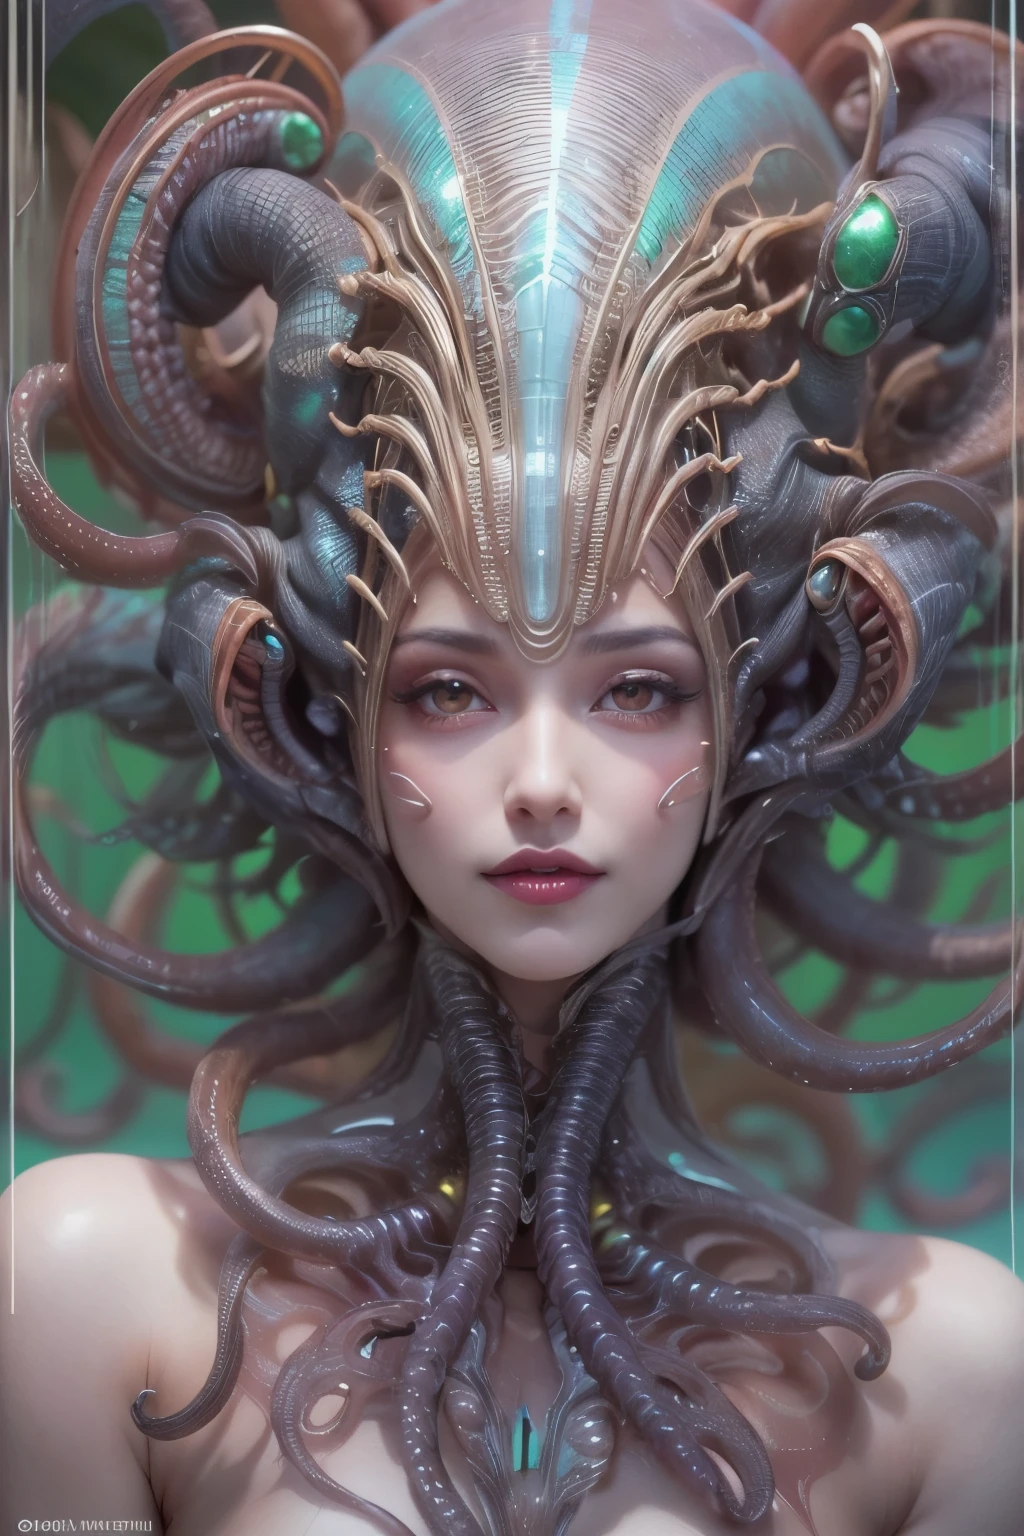 (1 beautiful and obscene female alienin the sea:1.4), (There is a female genital-like organ in the middle of her forehead:1.95), She has medusa-like hair, (there are lots of translucent tentacles from her head like her hair:1.5), (vulgarity1.7), (she is looking down at viewers with glowing red eyes with no pupils:1.6), (She has translucent pale skin:1.4),(She has the most beautiful face in the history of the universe:1.2), (She has multiple bioluminescent organs on the side of her tentacles:1.4), (Her body is covered with an iridescent exoskeleton:1.4), (She is showing her arm pits:1.6), an evil gaze that seduces, (looking down at viewers:1.4),(Vampire-like long canine teeth can be glimpsed through the gap between the cute lips:1.4) (bio luminescent:1.4), (Smile wickedly:1.3), (sexypose:1.4), alien, No humans, cells are fused, extraterrestrial, cell, bio image, ultra high resolution, (photos realistic:1.7), (Numerous award-winning masterpieces, with incredible detail, textures and maximum detail), Dramatic Lighting, cinematic quality, (exquisite details:1.2), High freshness, drawing faithfully, (Thick eyebrows:1.2), Beautiful eyes with fine symmetry,(Highly detailed face and eyes:1.2),(Super detailed skin quality feeling:1.4), perfect anatomy, (Beautiful toned body:1.5), (Moist skin:1.2), not wearing makeup, (dark circles:1.1), long canines, cinematic drawing of characters, cinematic quality, (exquisite details:1.2), high resolution, High freshness, drawing faithfully, official art, Unity 8K Wall paper, ultra detailed artistic photography, midnight aura, unreal engine 5, Ultra Sharp Focus, art by Amano Yoshitaka, ArtGerm, ultra realistic realism, dream-like, Creation of fantasy, dream Snail, (biopunk nautilus:1.3),Thrilling color schemes, seductively smiling, Amazing mutation, well-proportioned body, goddess of the deep sea, fractal, Geometric pattern, impossible figures, subtle emerald green accents, (expression of ecstasy:1.5)